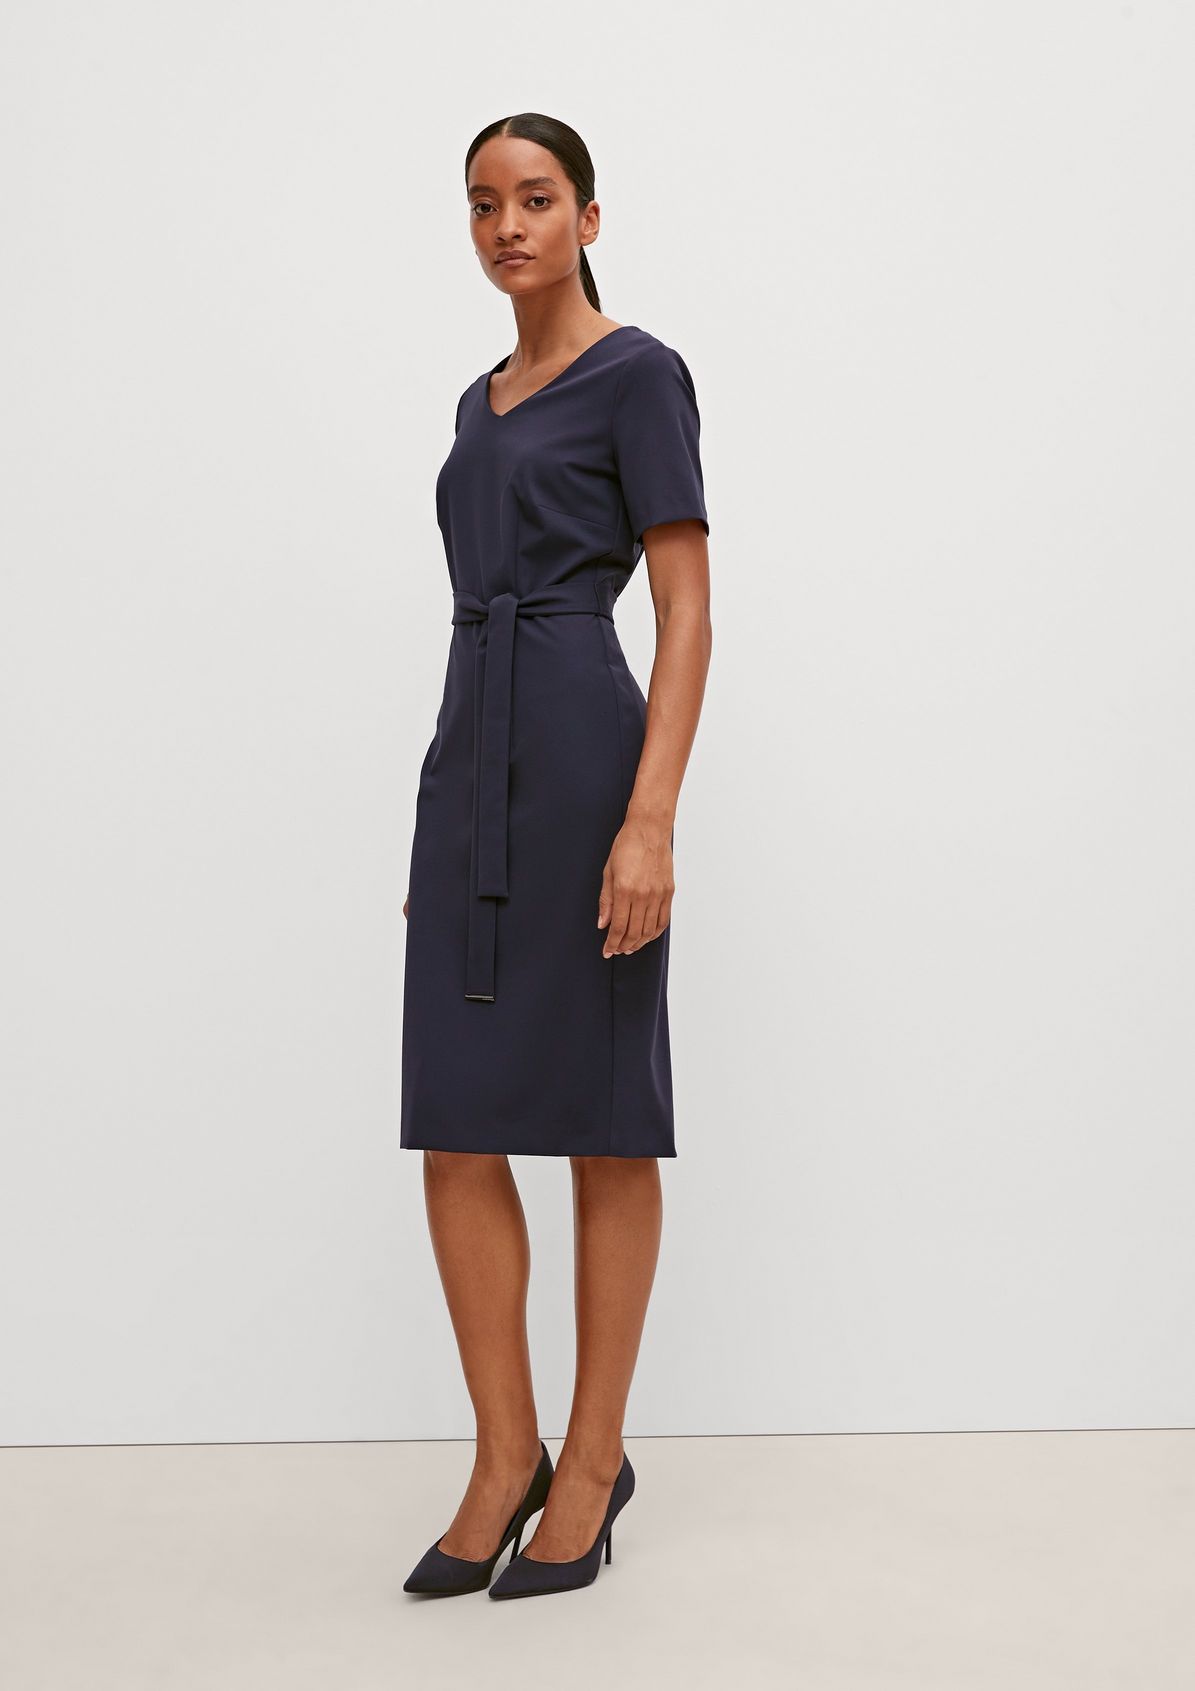 Sheath dress made of tricotine fabric from comma